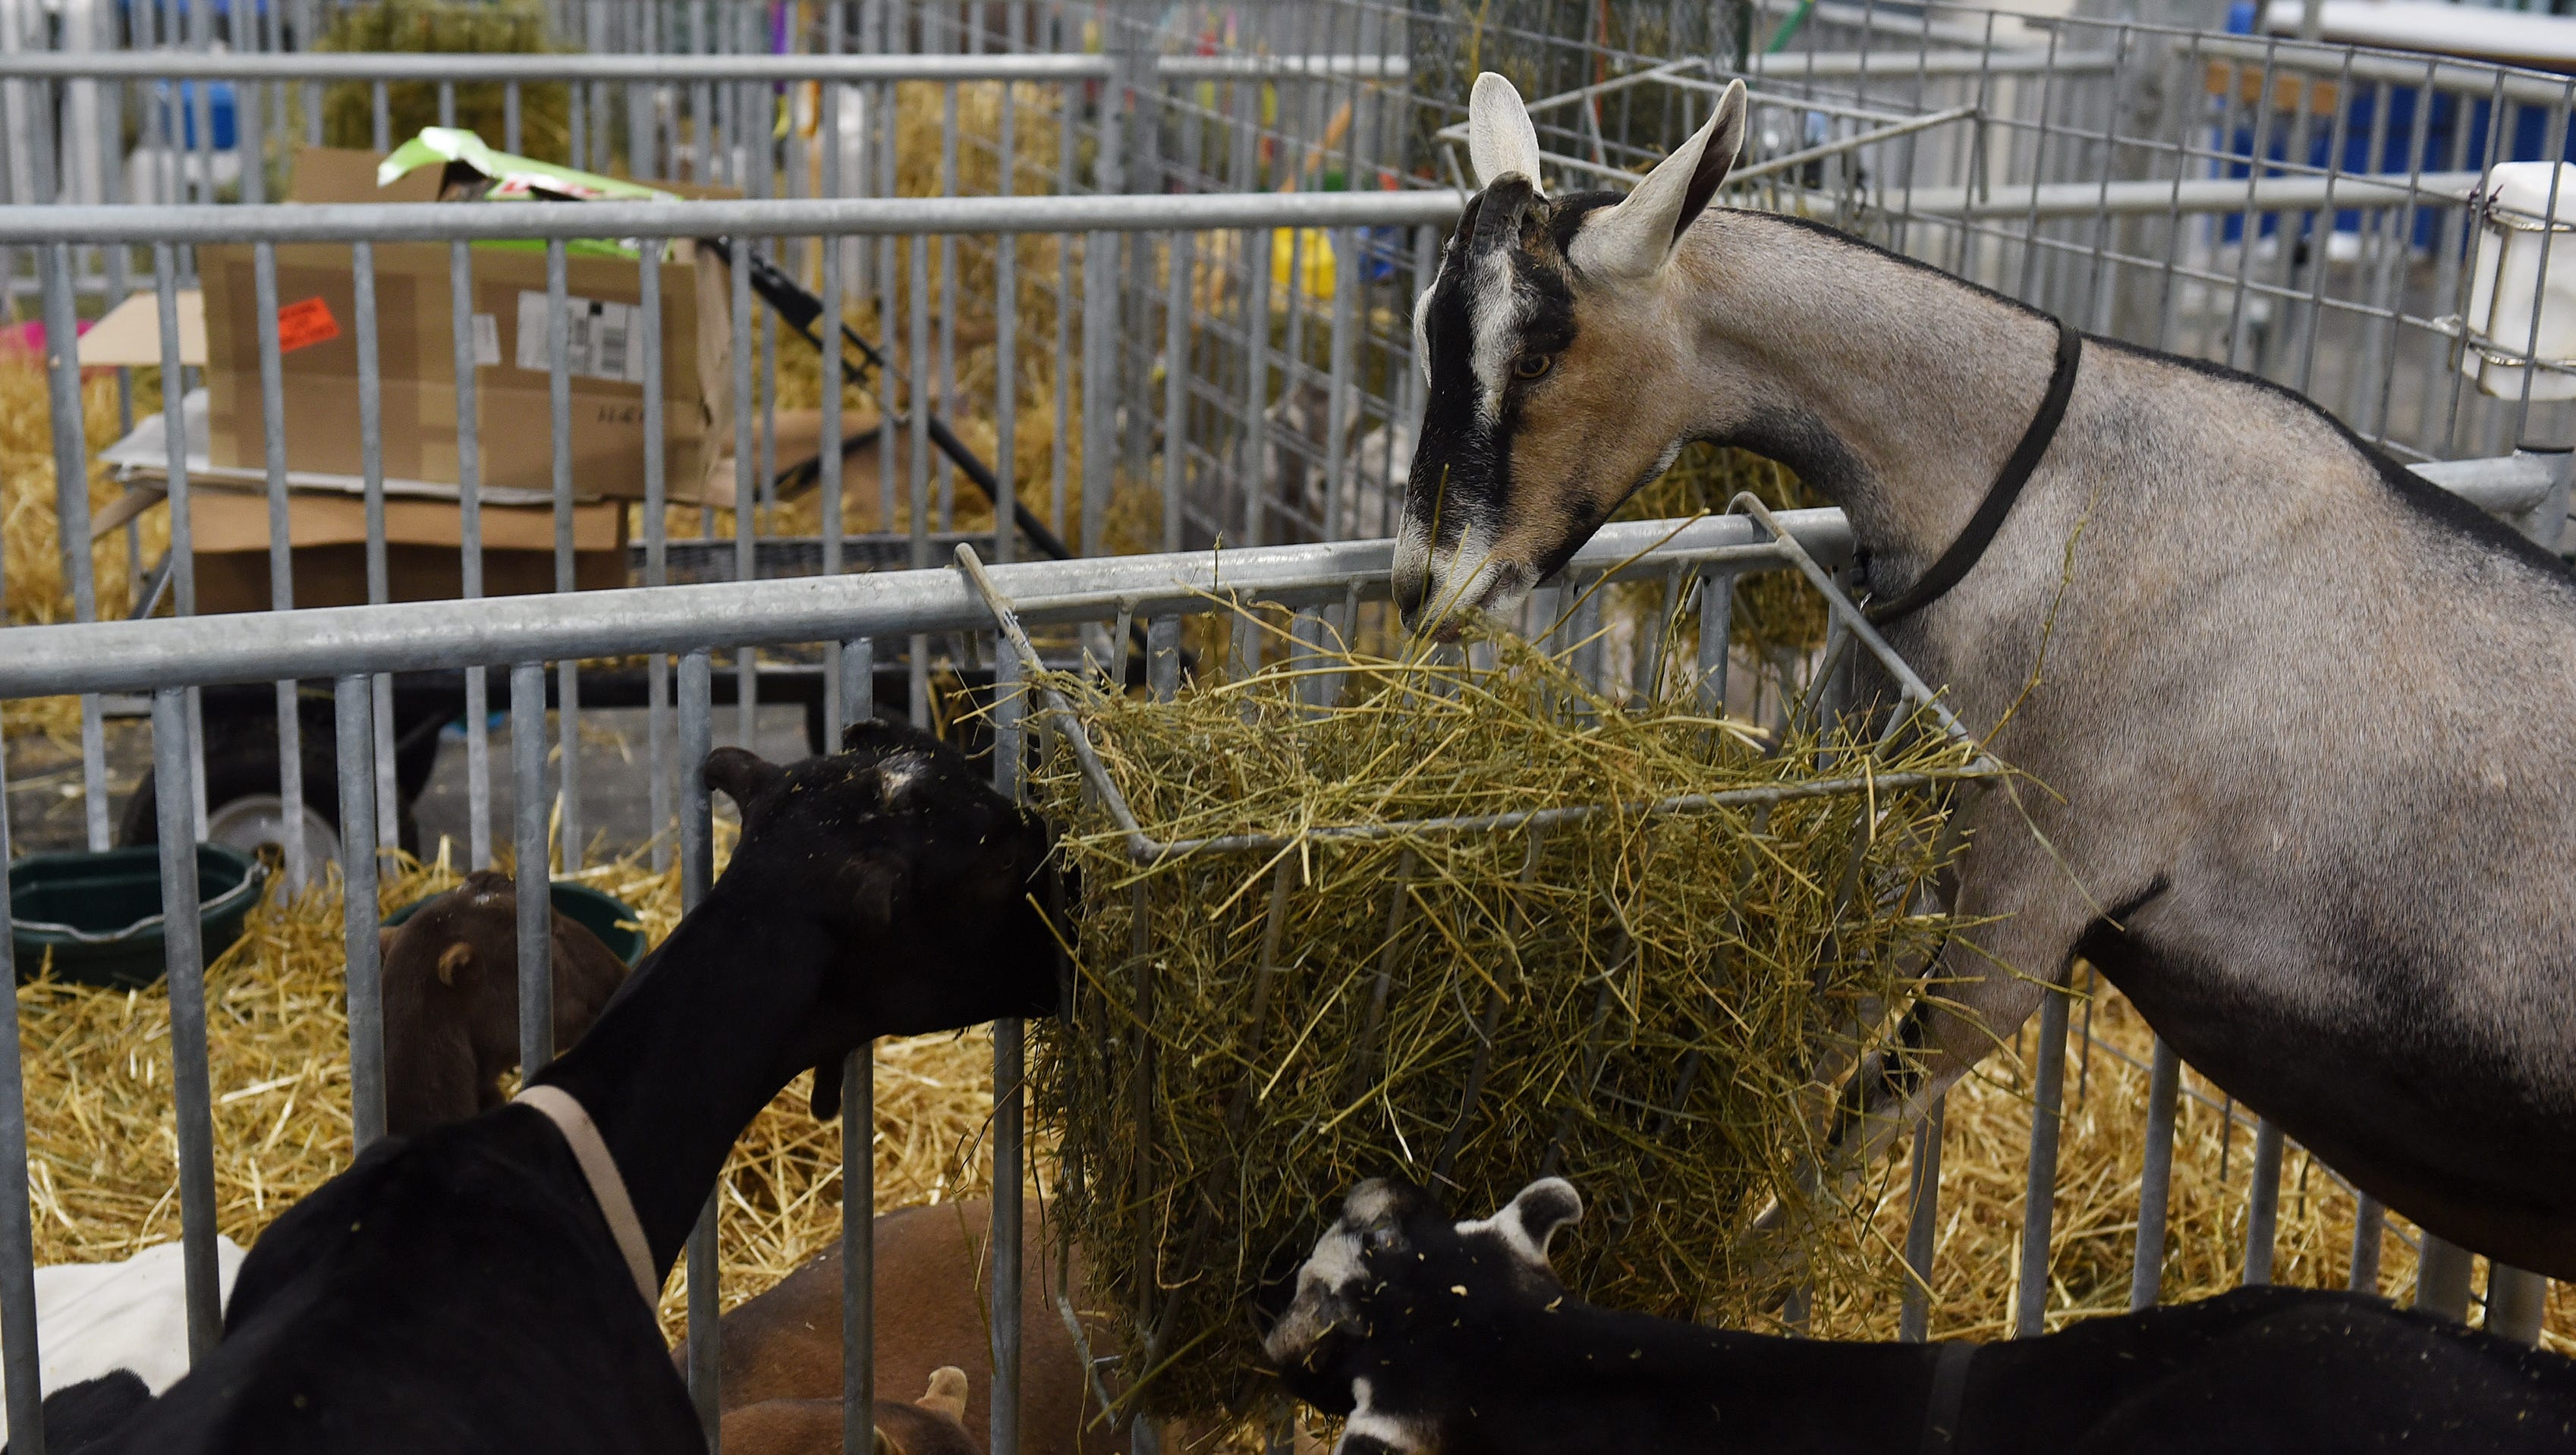 Goats from Udderly Nutz Dairy Goats of Lyons eat hay at their display at the Michigan State Fair.